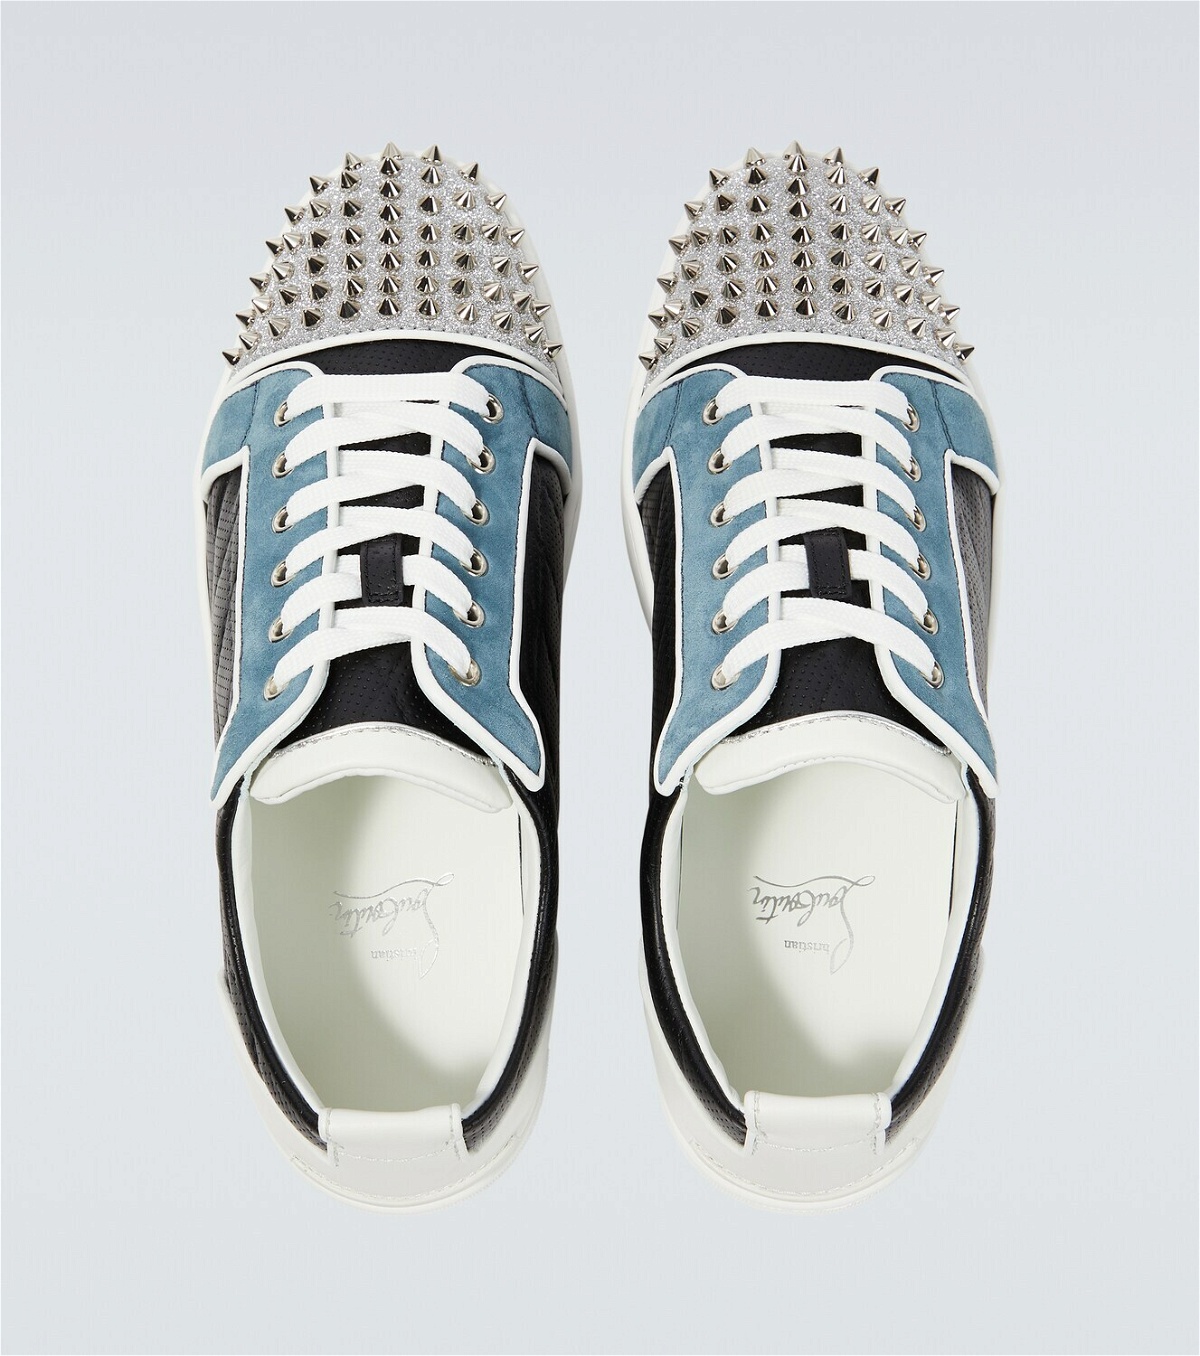 Christian Louboutin Louis Junior Spikes White/Beige Sneakers New